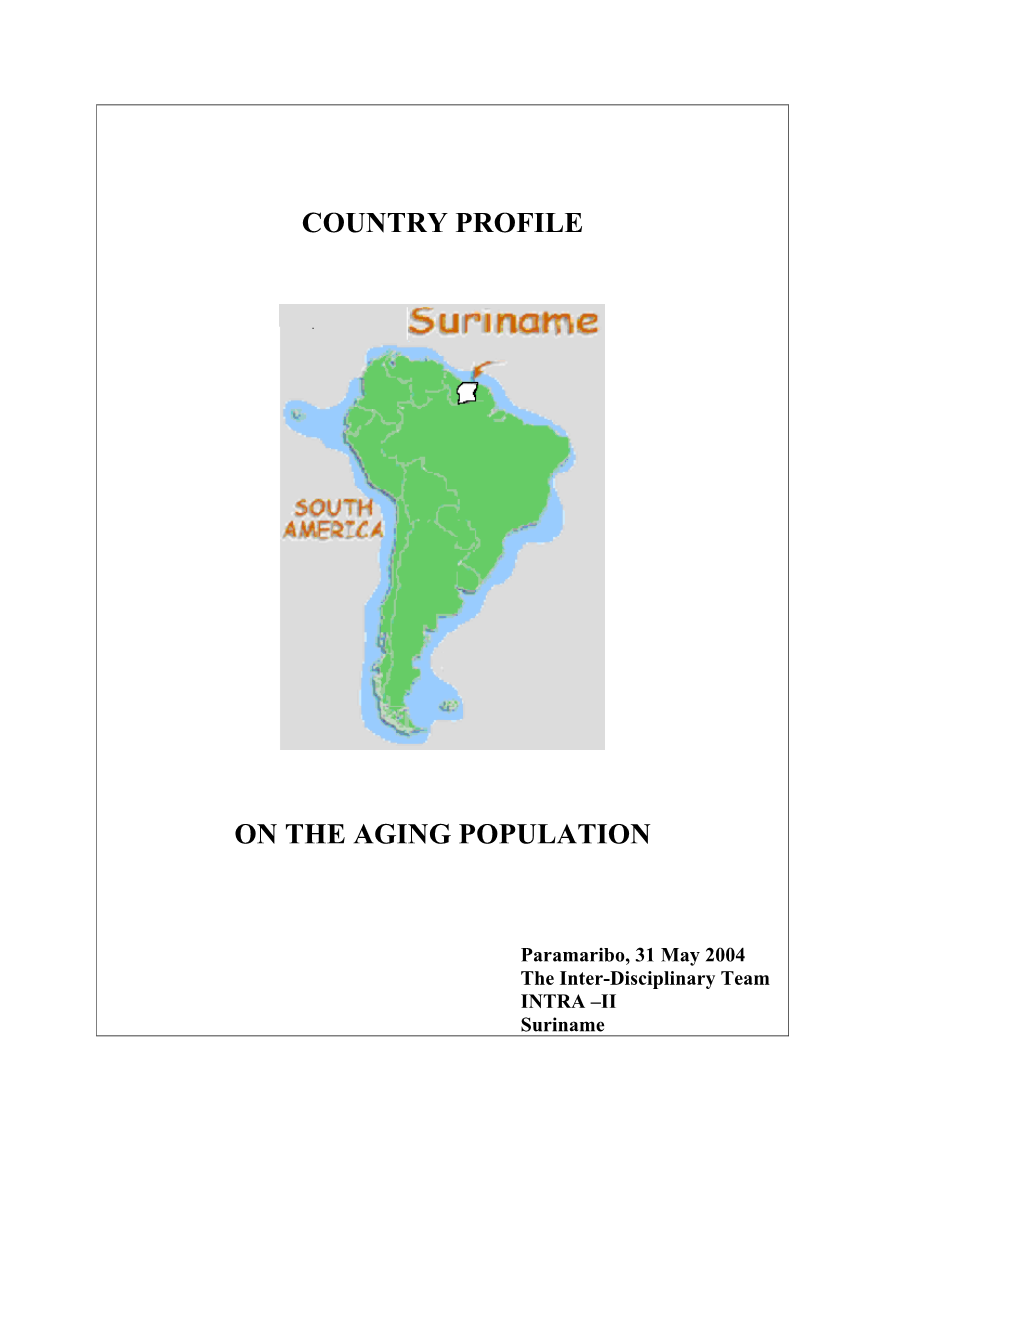 Country Profile on the Aging Population